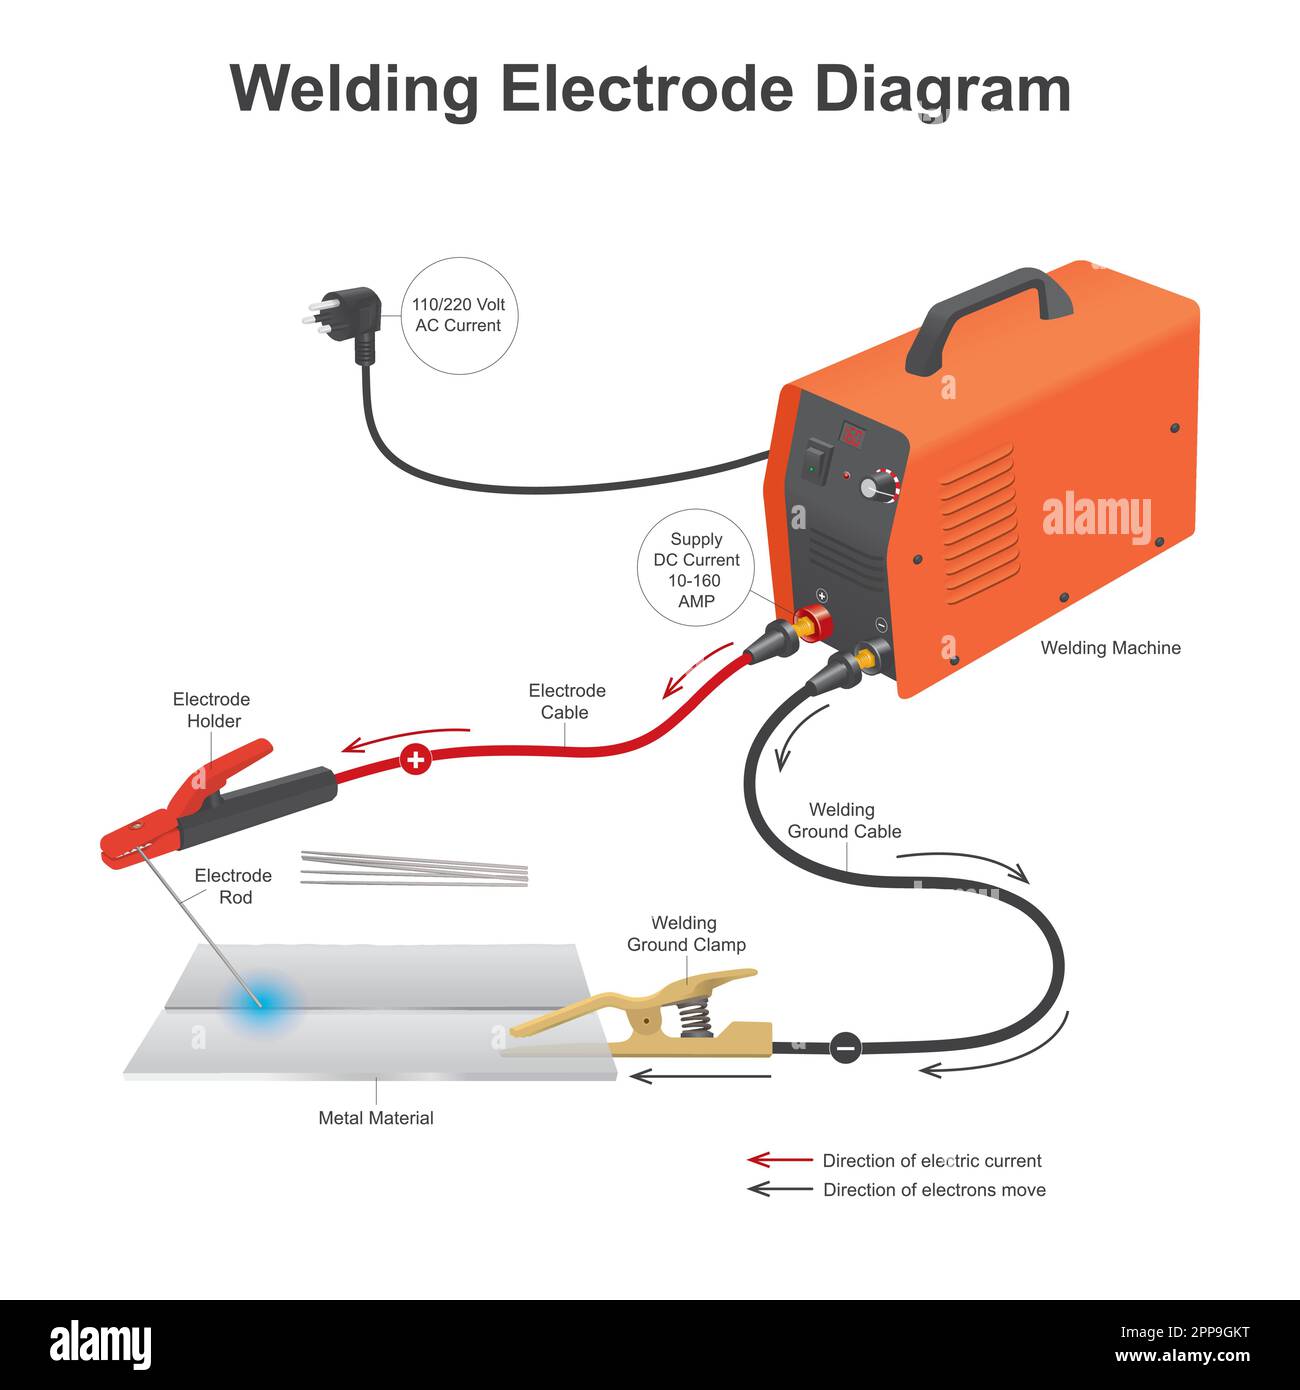 Electric Arc Welding Working Principle and Process | ENGINEERING STUDY  MATERIALS - YouTube